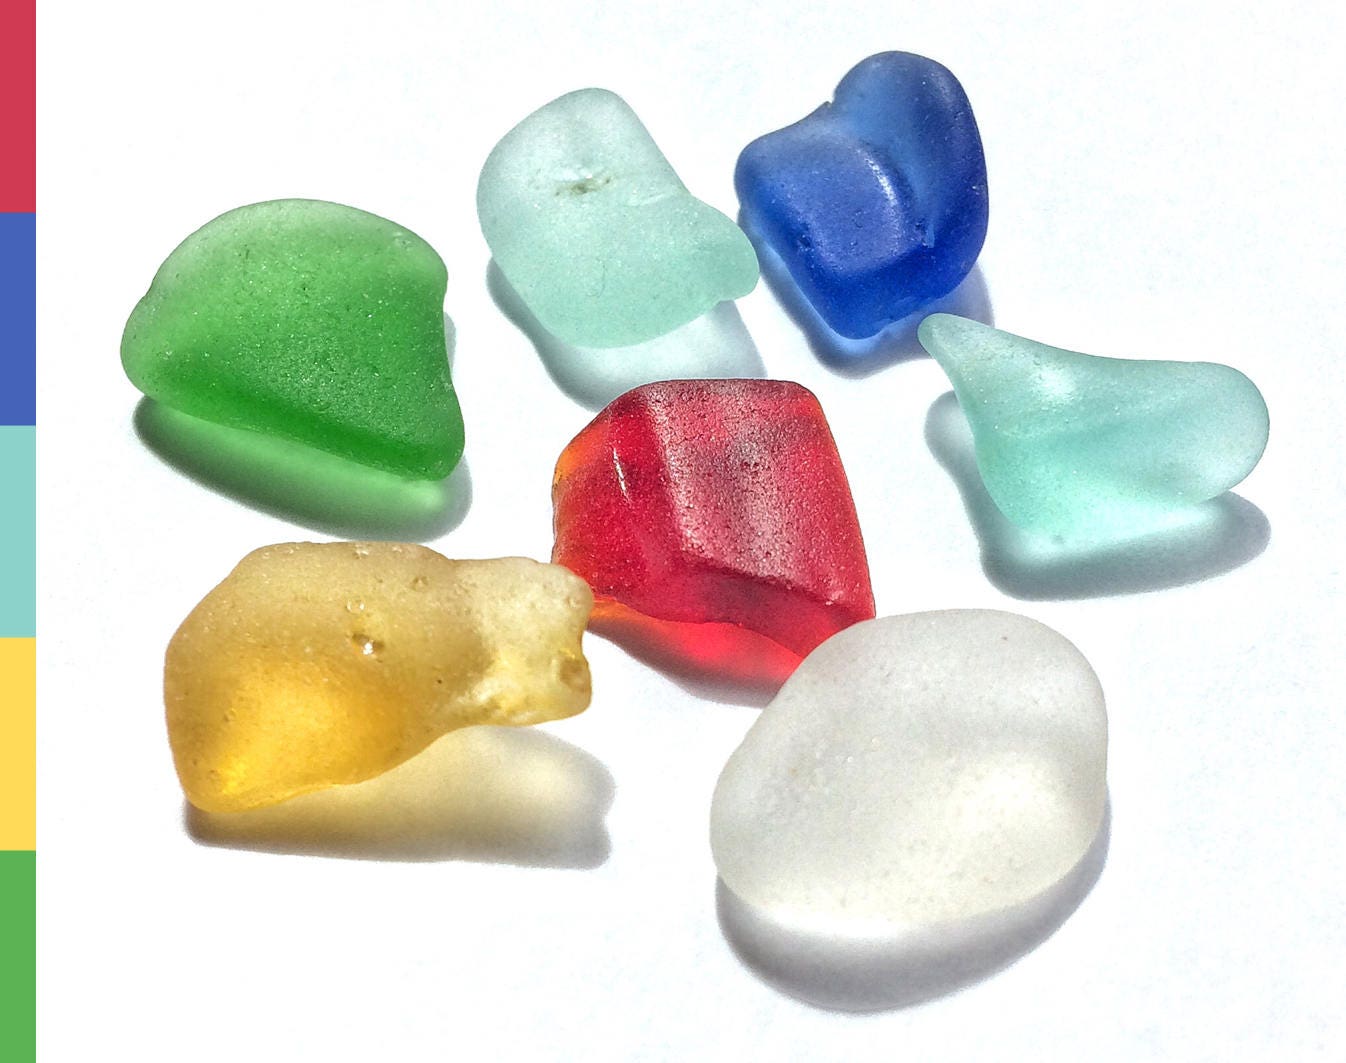 Rainbow Sea Glass Bundle Natural And Frosted Beach Glass Surf Tumbled And Washed Up On A Beach